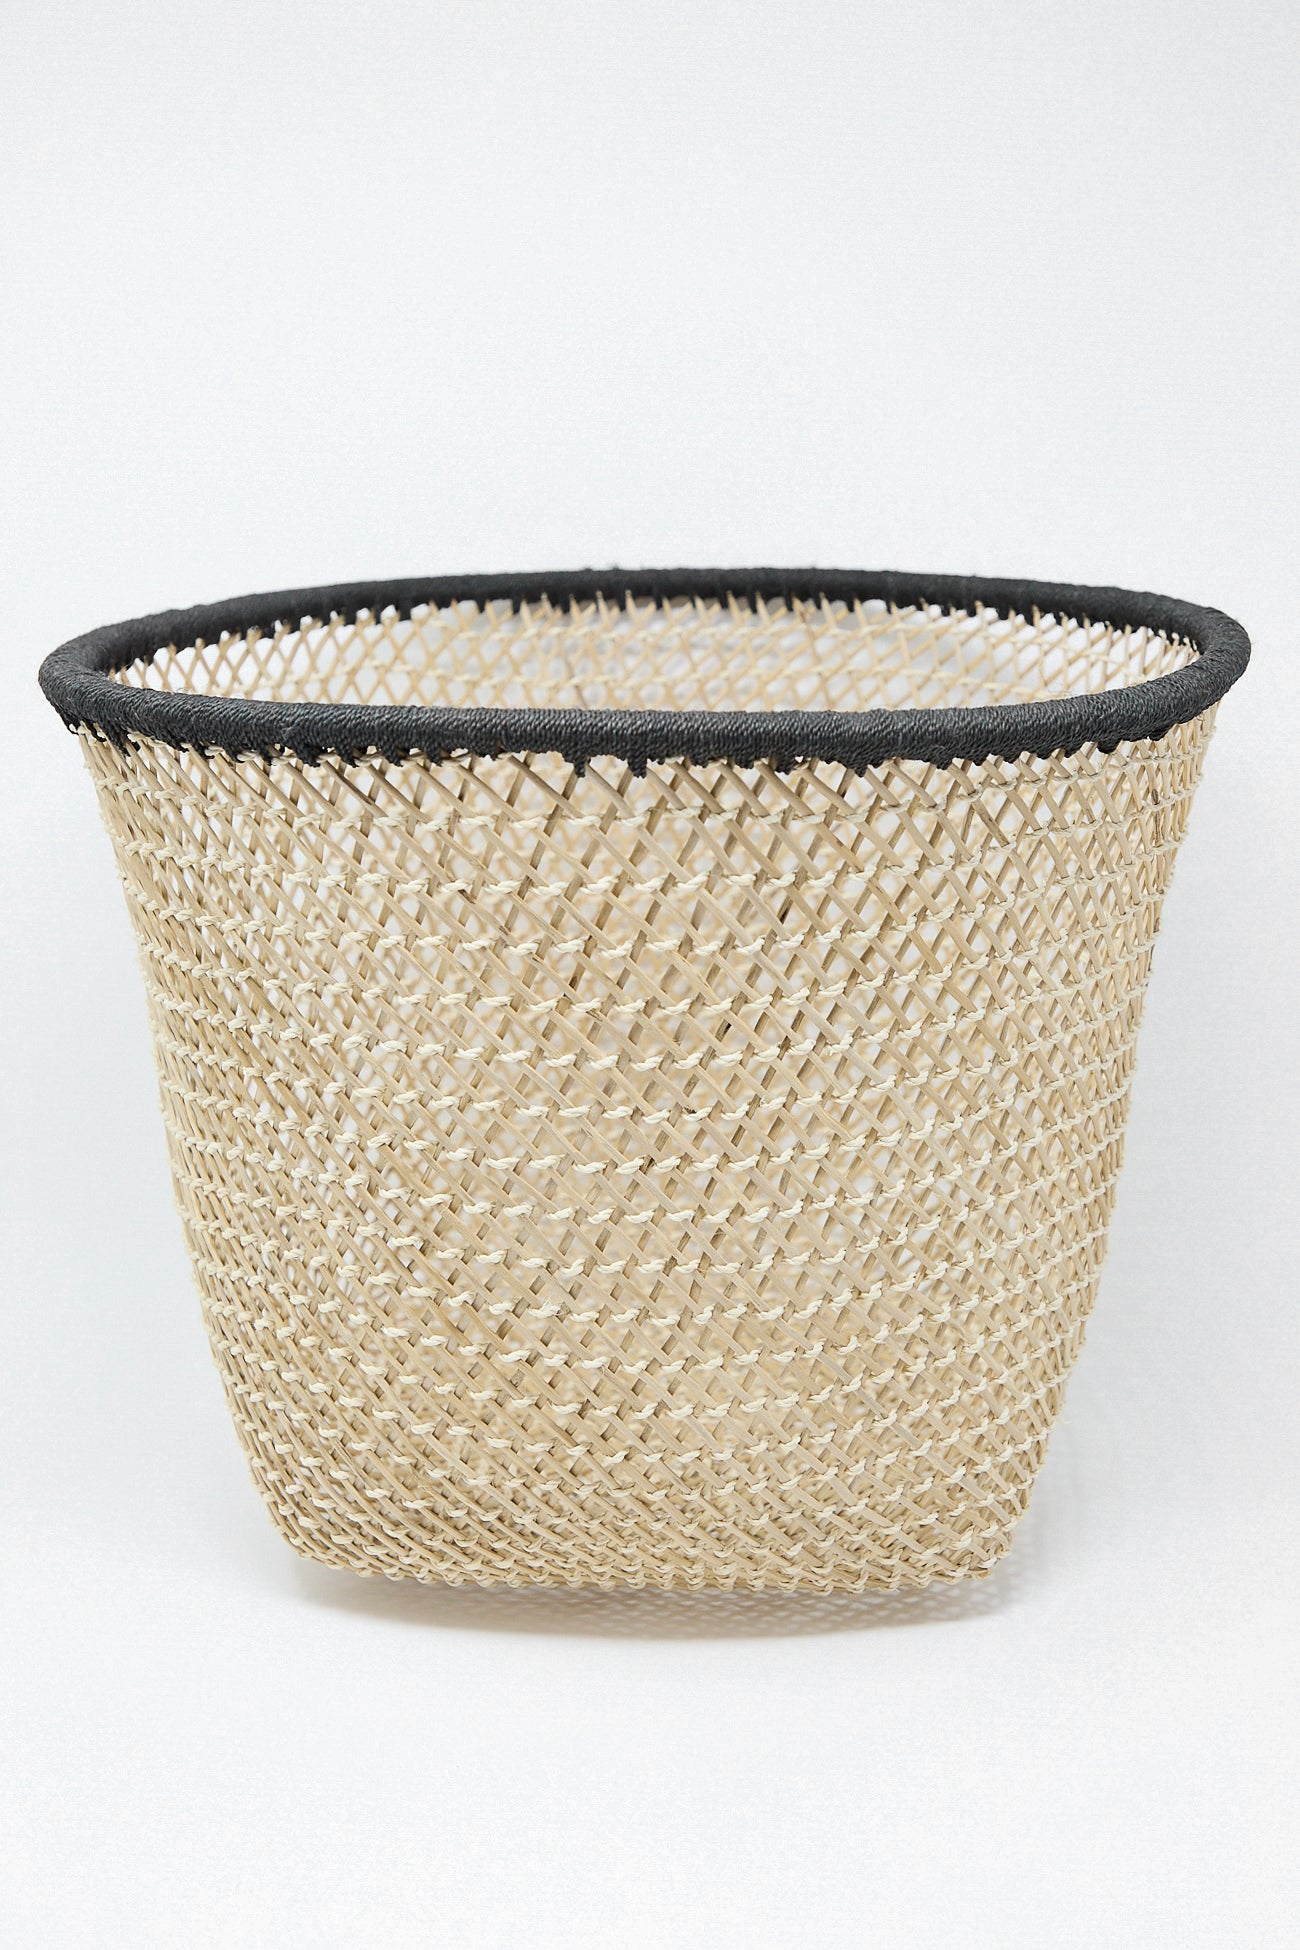 Plaza Bolivar's Niga Open Weave Basket in Black, featuring black trim on a white background, from Colombia.